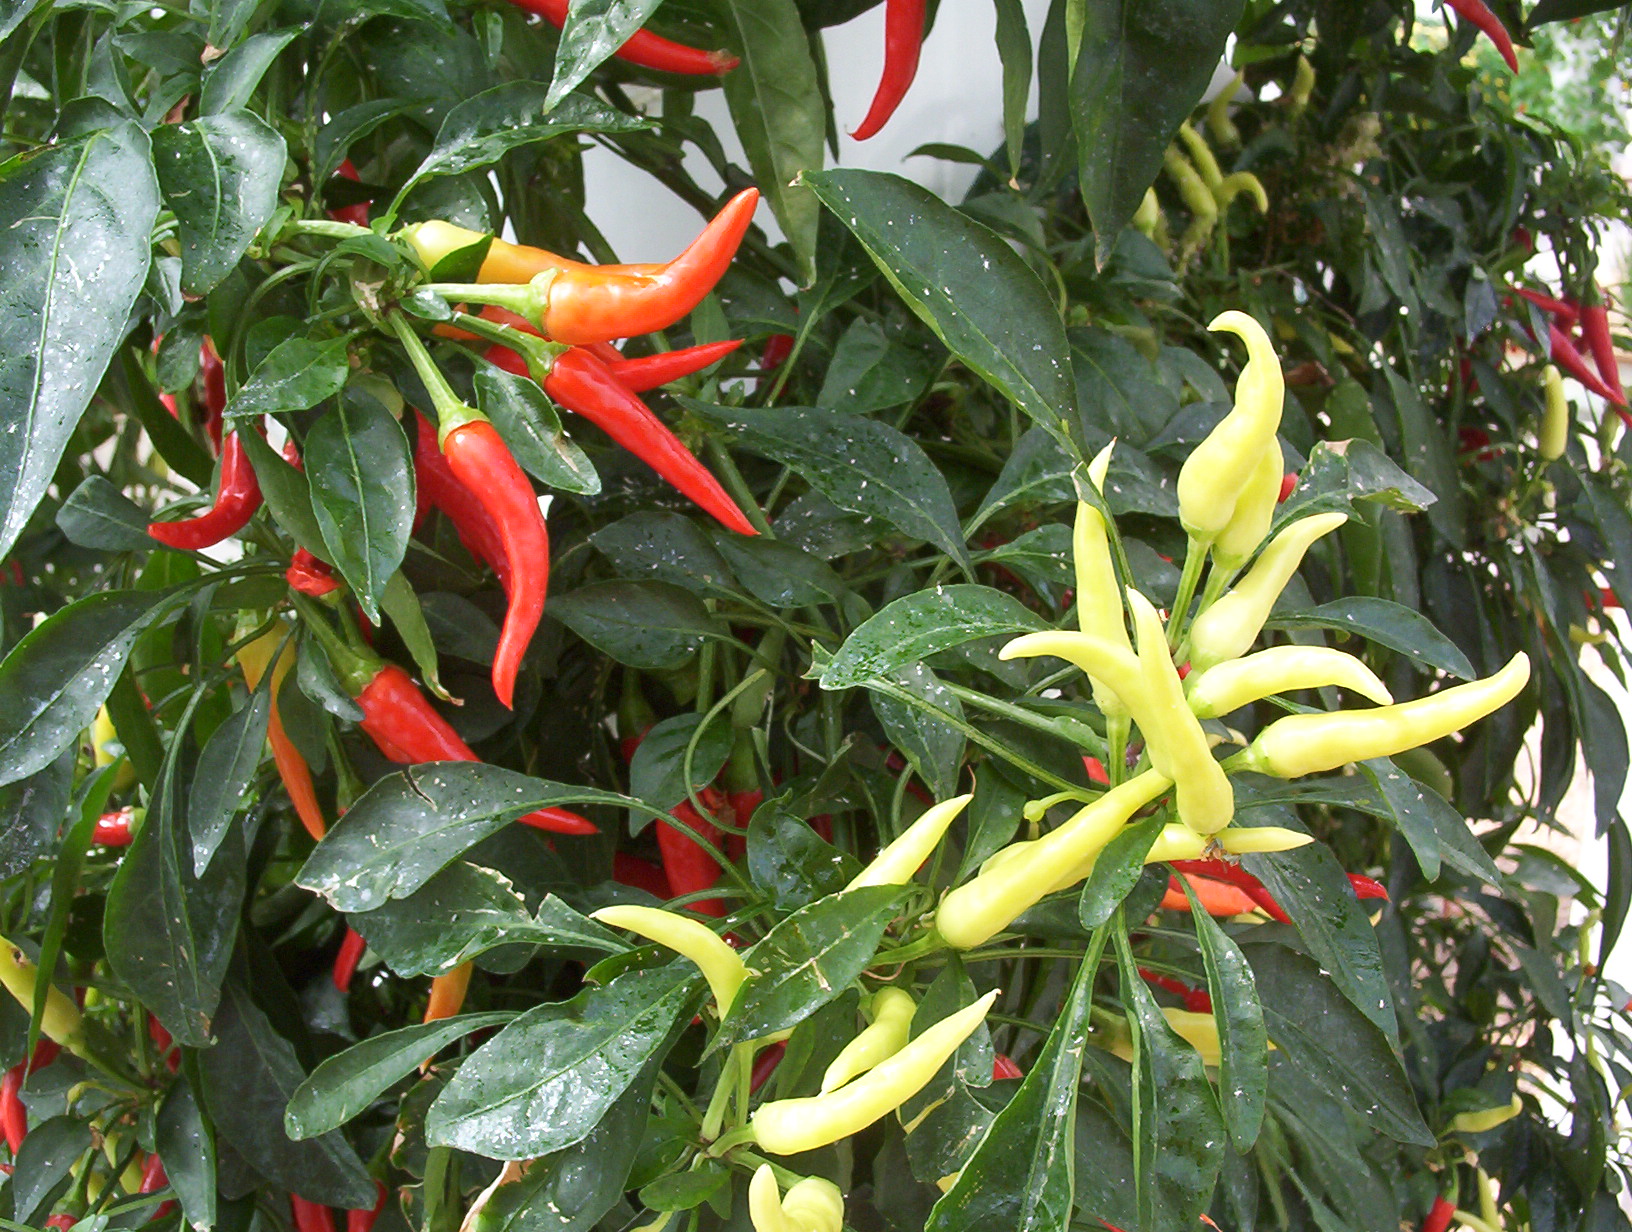 colorful tropical plant with red and yellow peppers